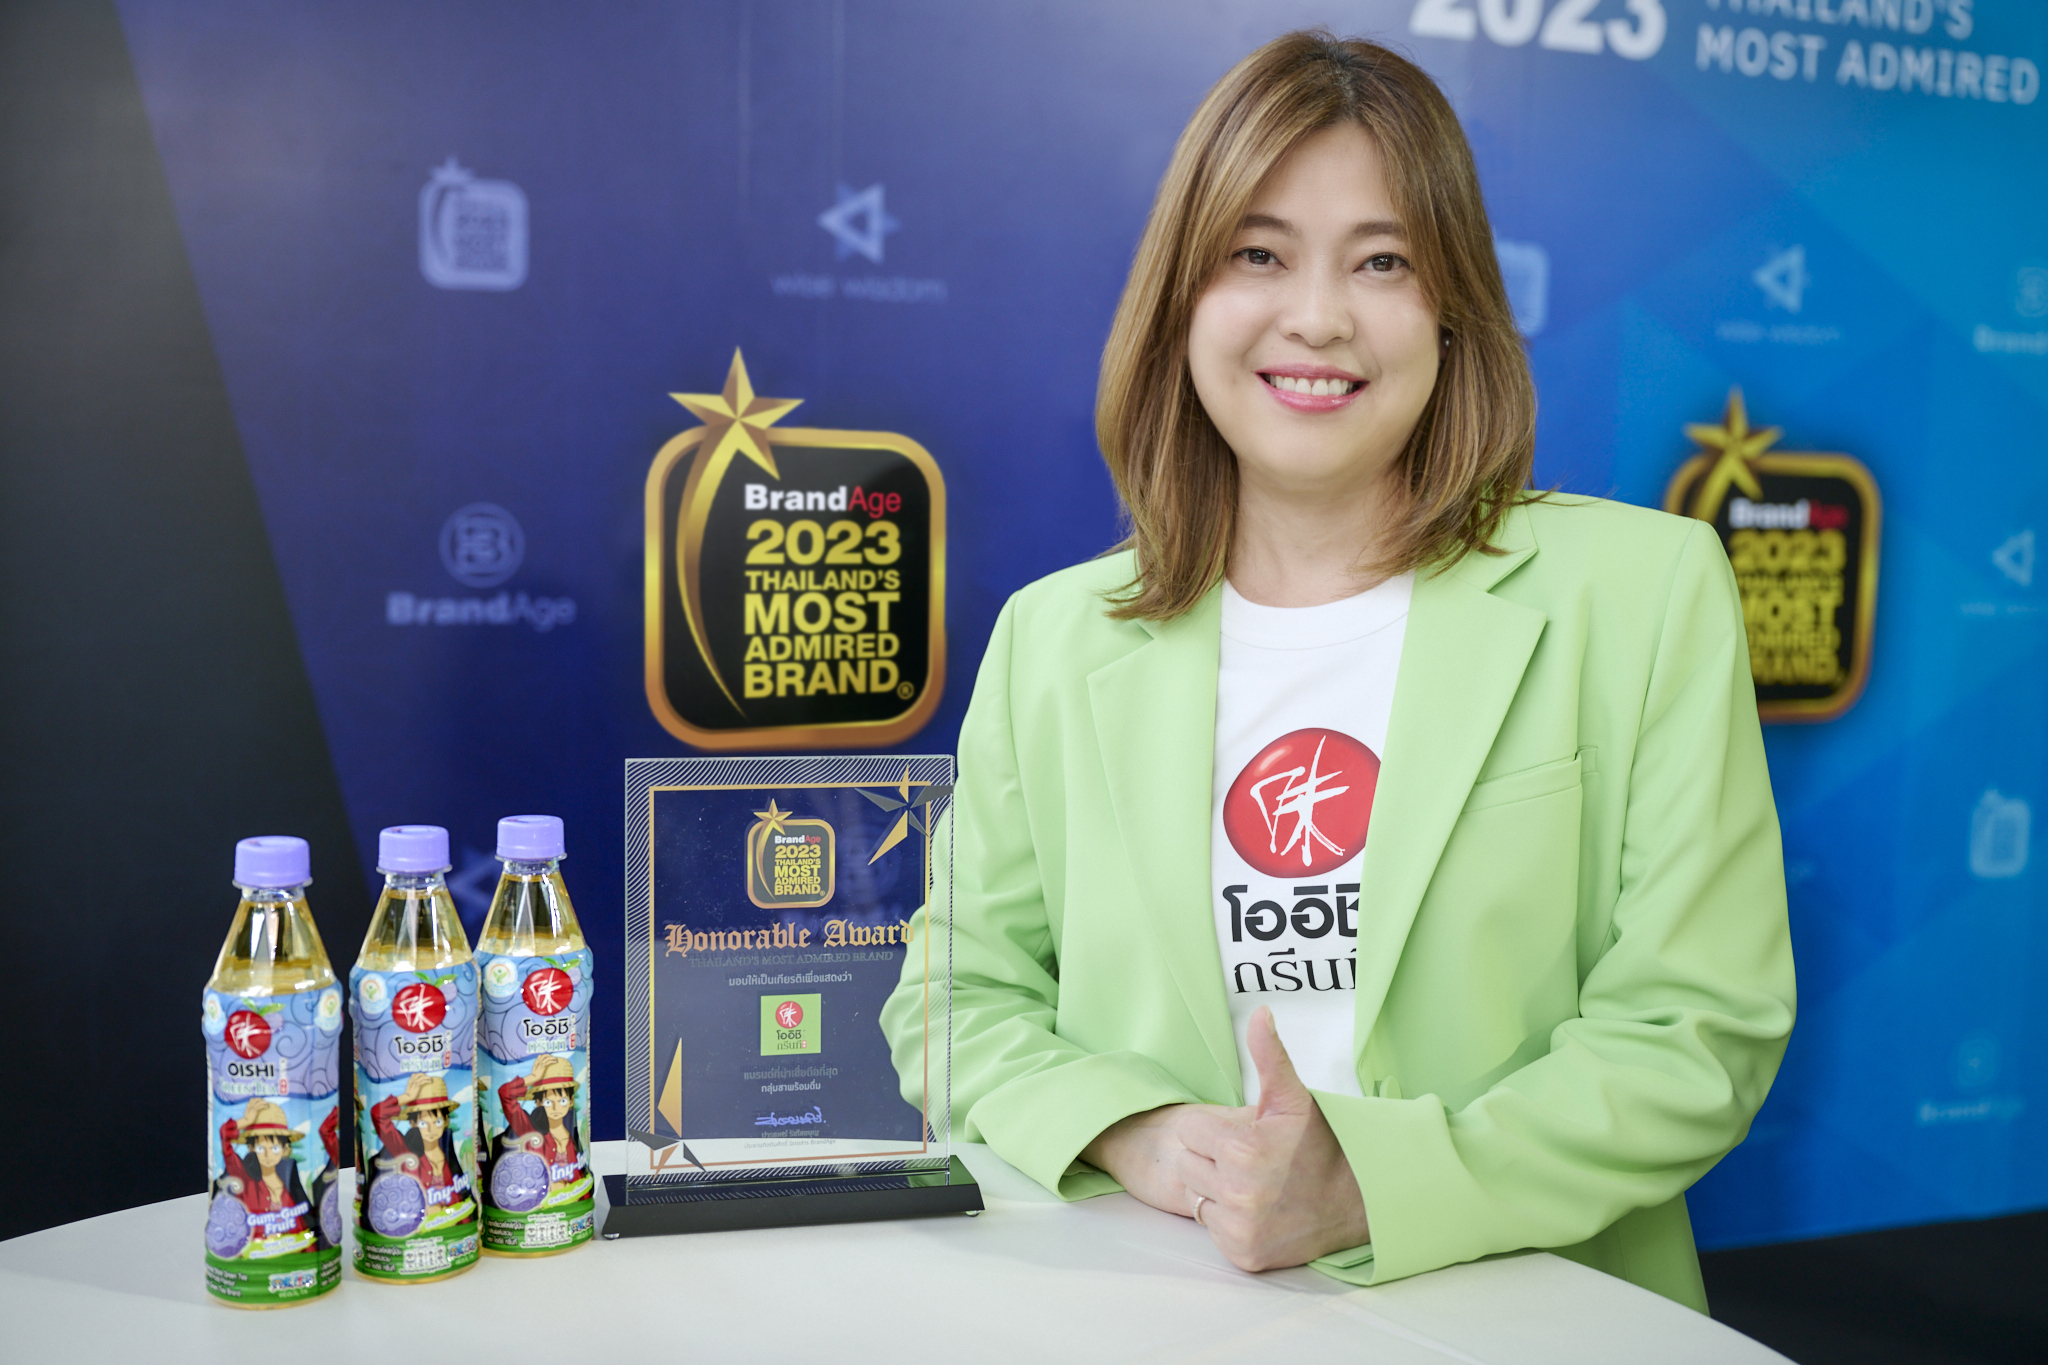 ‘OISHI’ the top-of-mind green tea brand wins 2023 Thailand’s Most Admired Brand